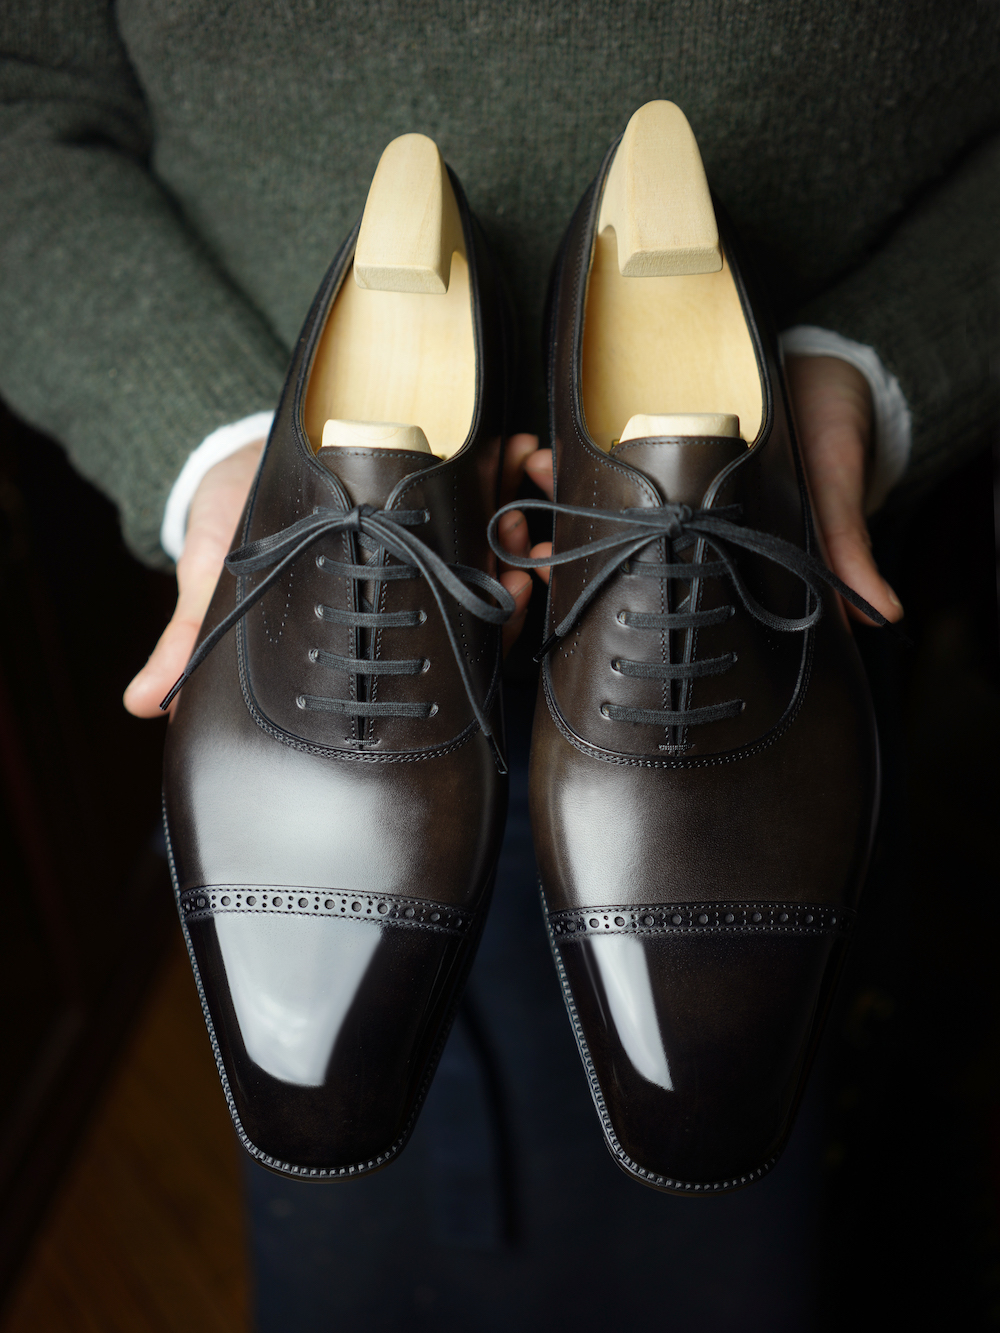 price of bespoke shoes